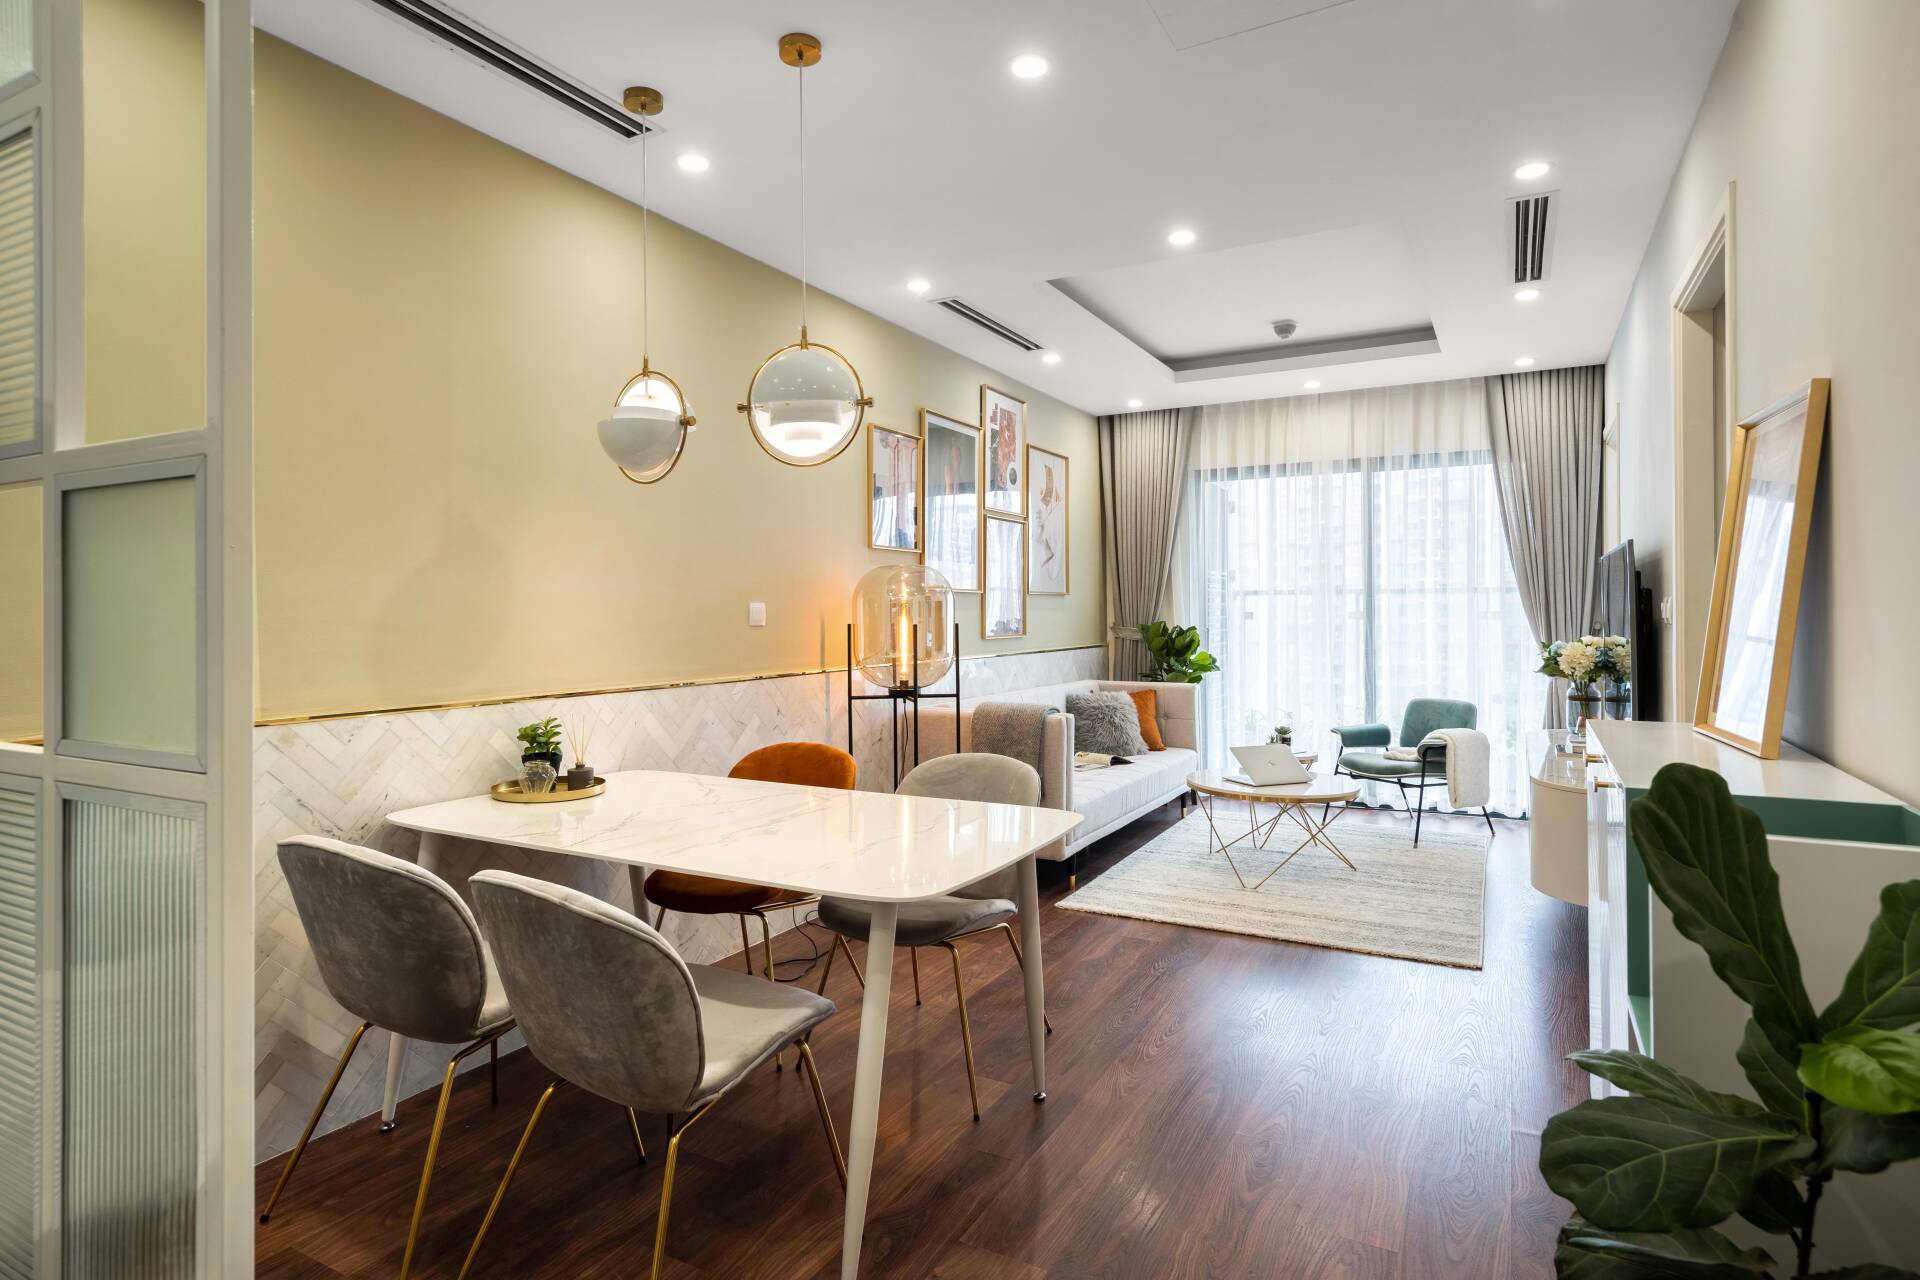 The dining area and living room are connected, creating a more spacious feeling.